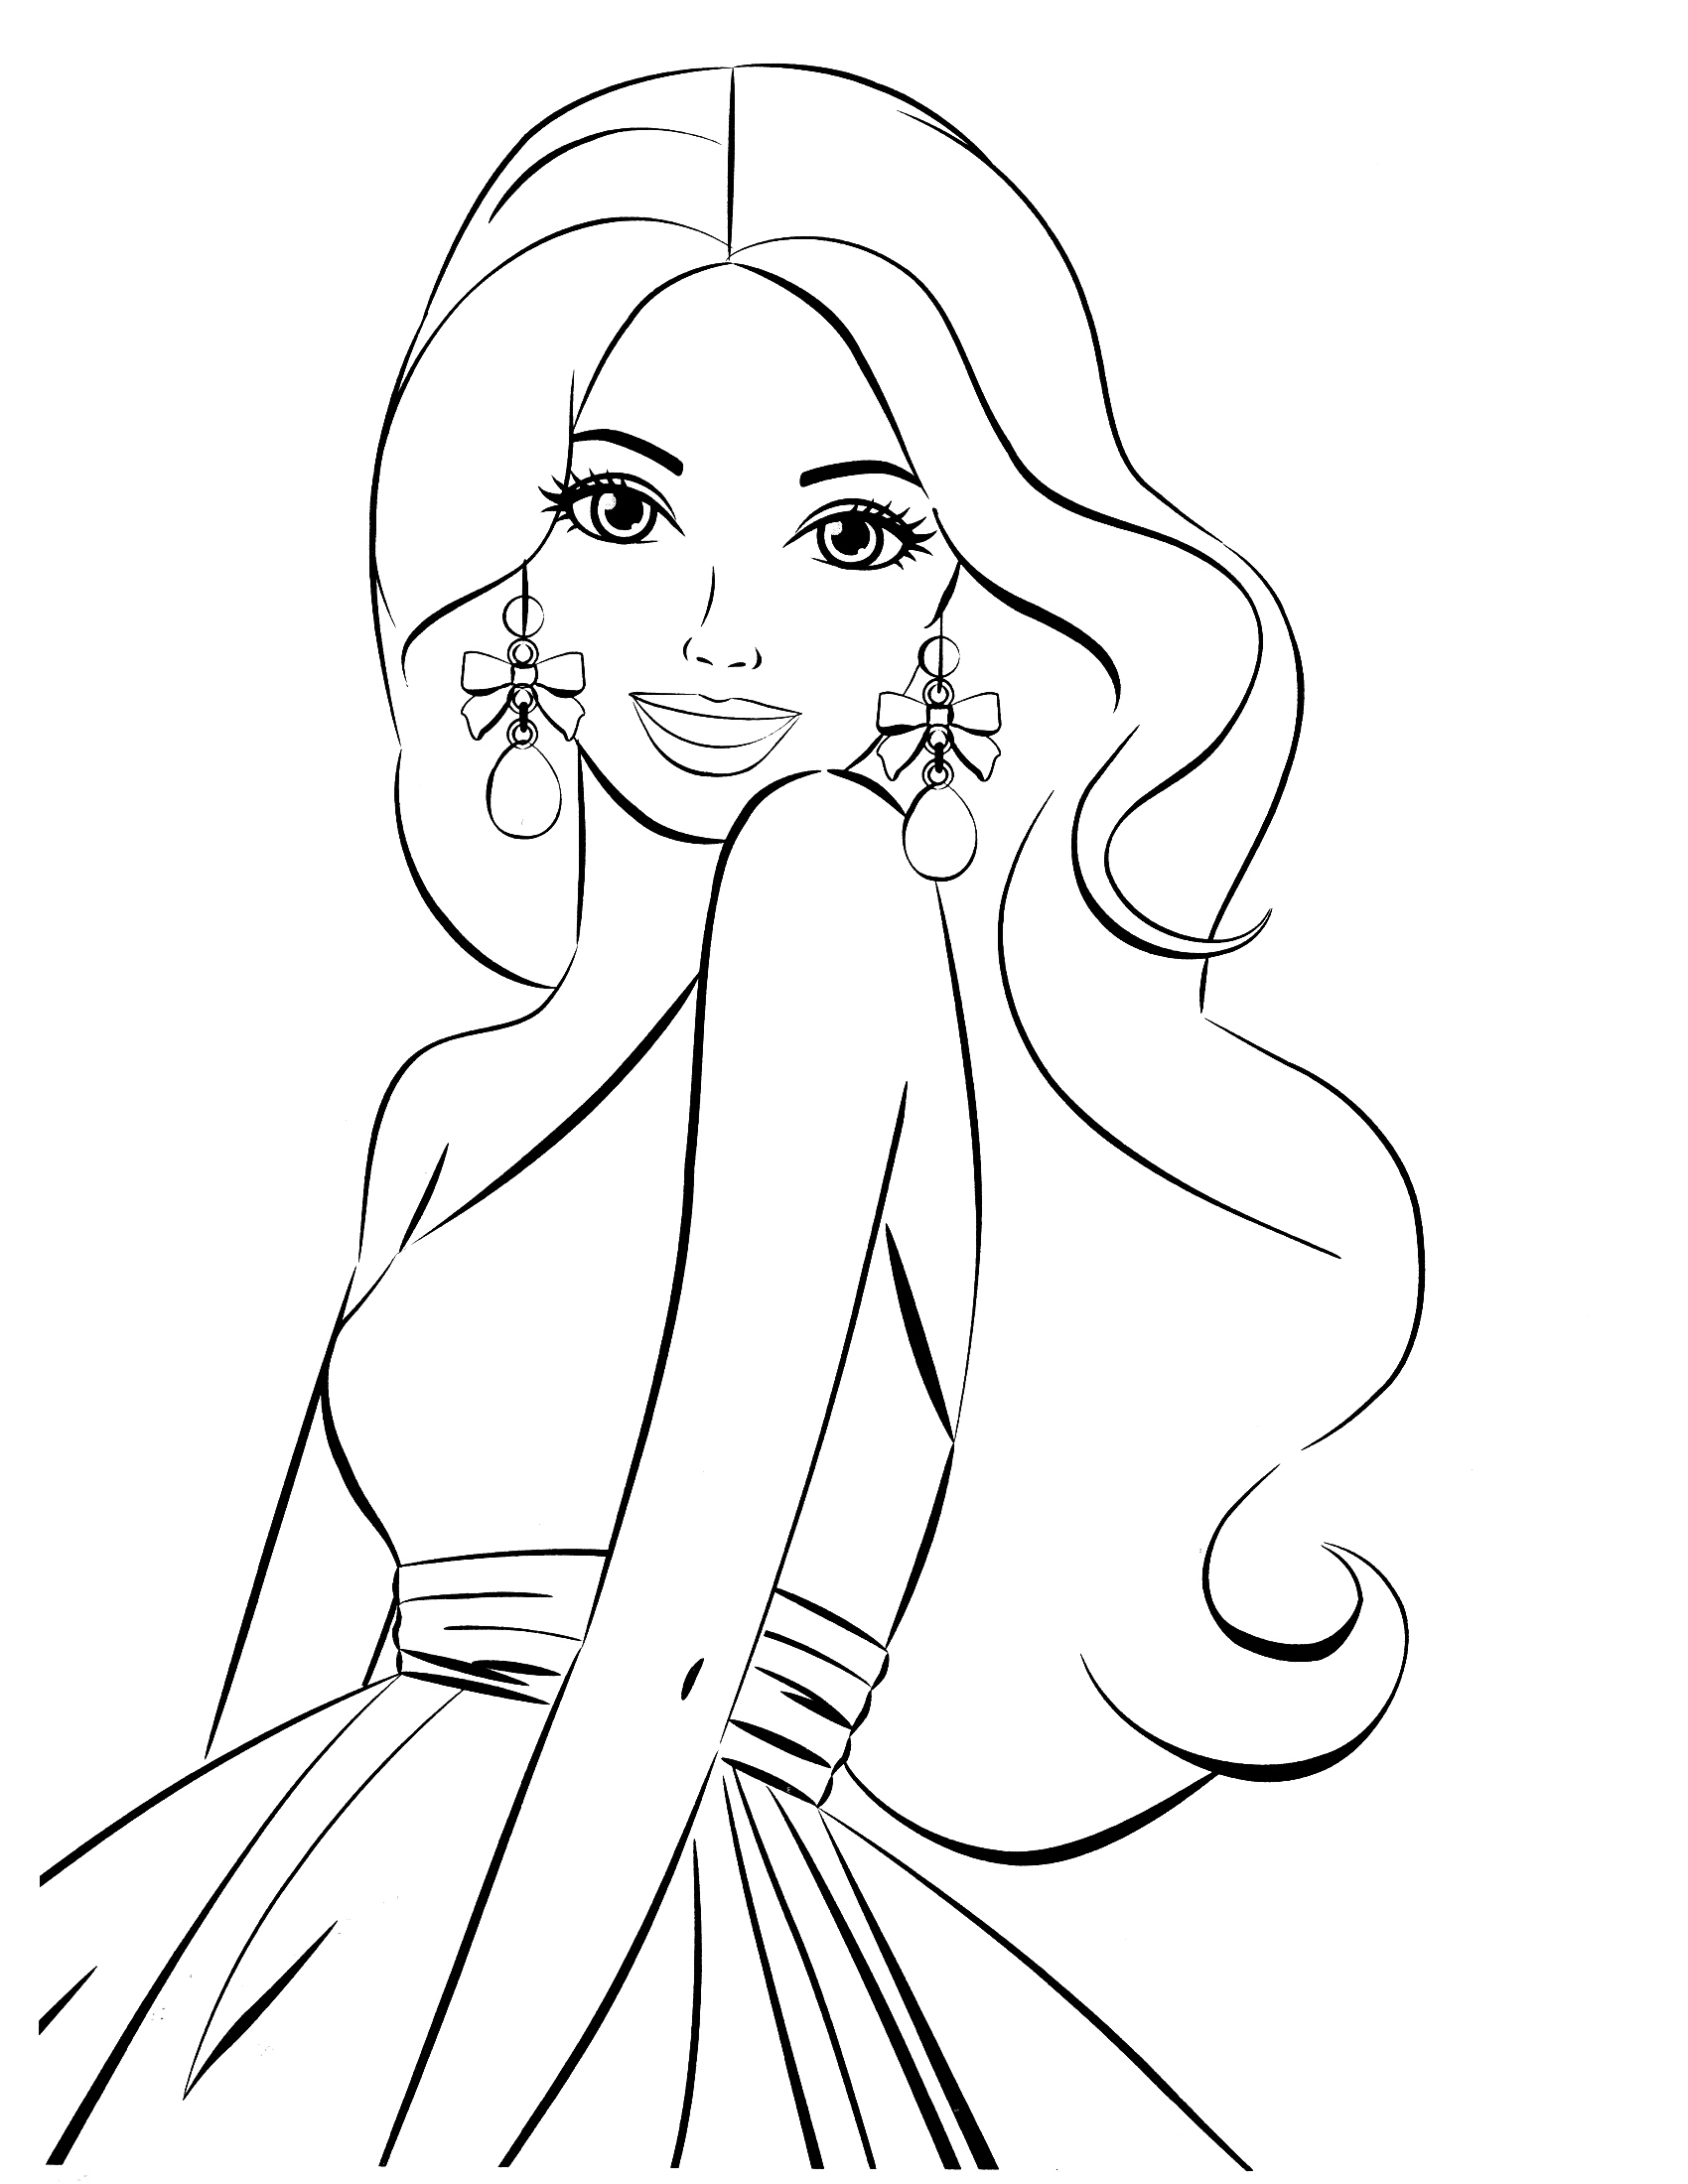 Coloring Pages : 60 Excelent Barbie Coloring Sheets Barbie Coloring - Free Printable Barbie Coloring Pages